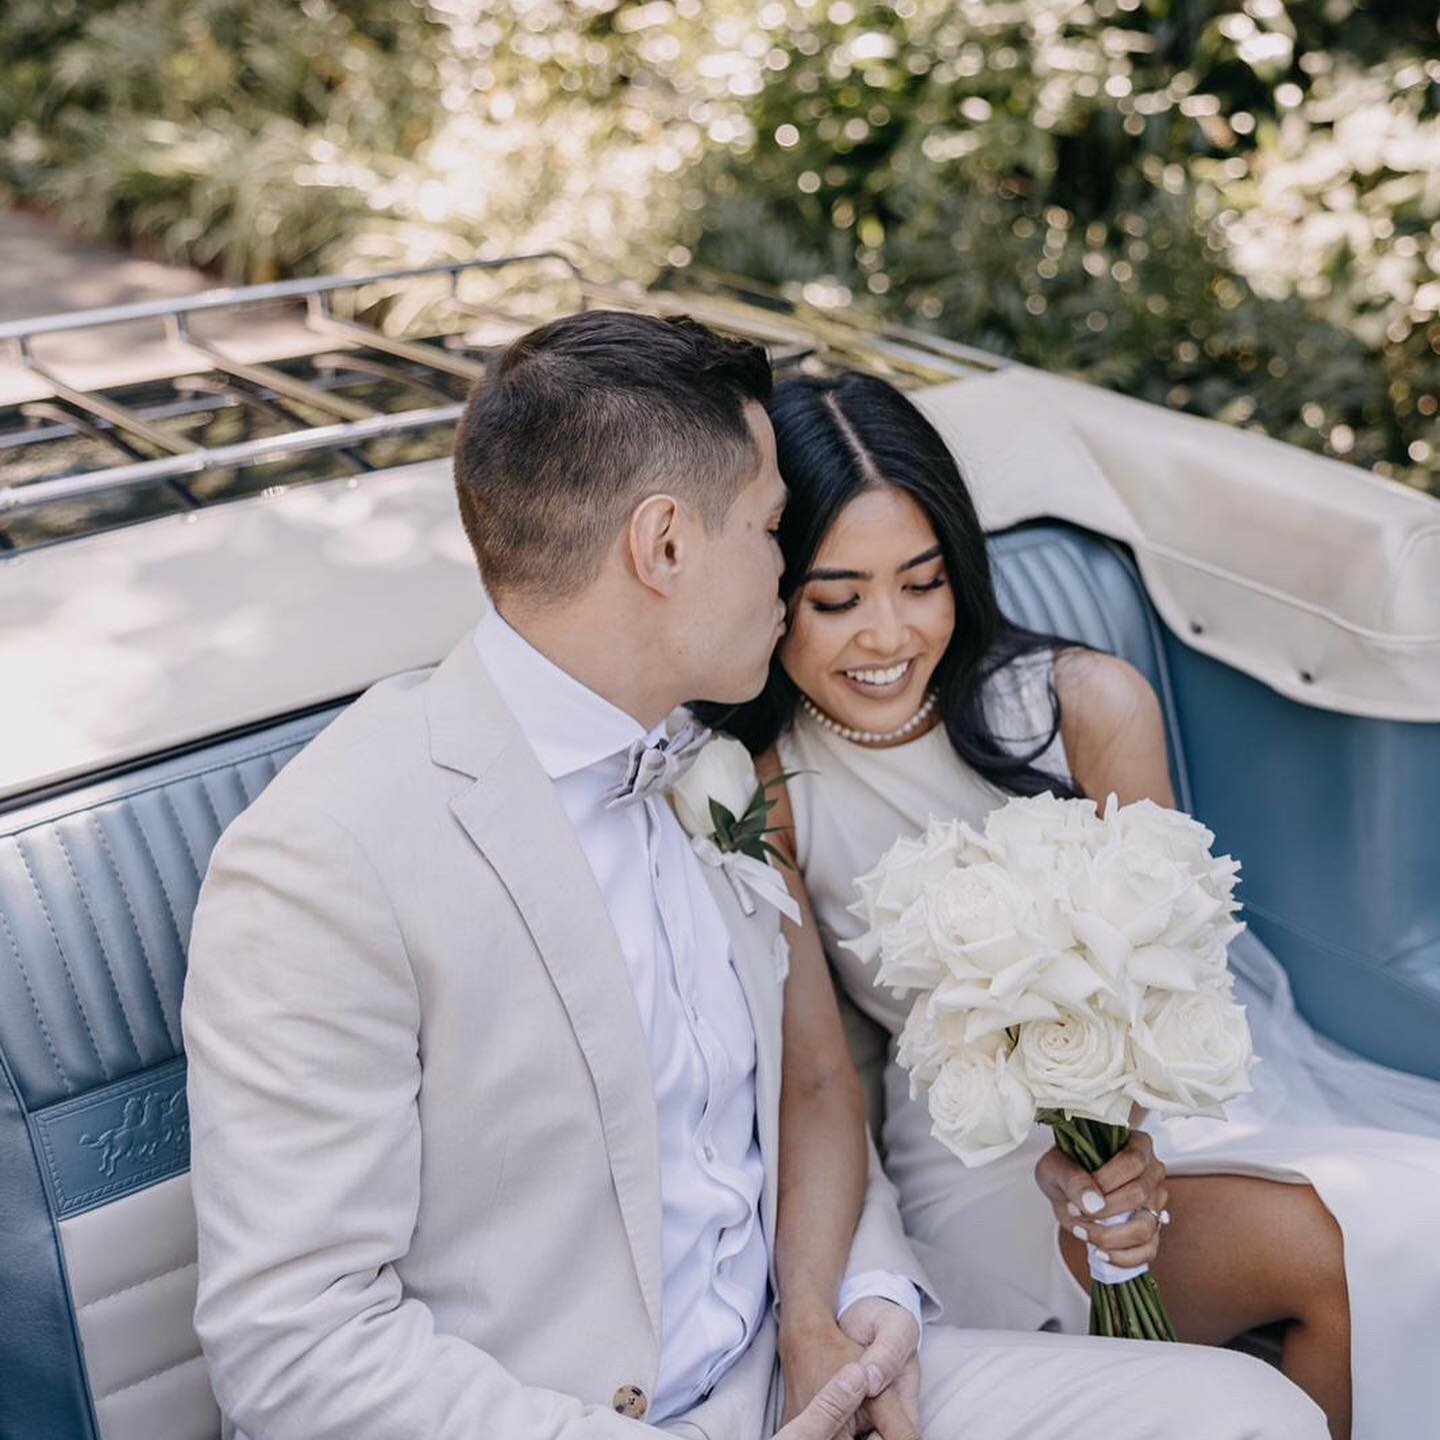 So excited to share with you Andrew &amp; Anisa's wedding on my blog and here on the gram!
⠀⠀⠀⠀⠀⠀⠀⠀⠀
Andrew and Anisa decided on an intimate wedding day at the gorgeous Gardens House, Botanic Gardens in South Yarra for their wedding day in February. 